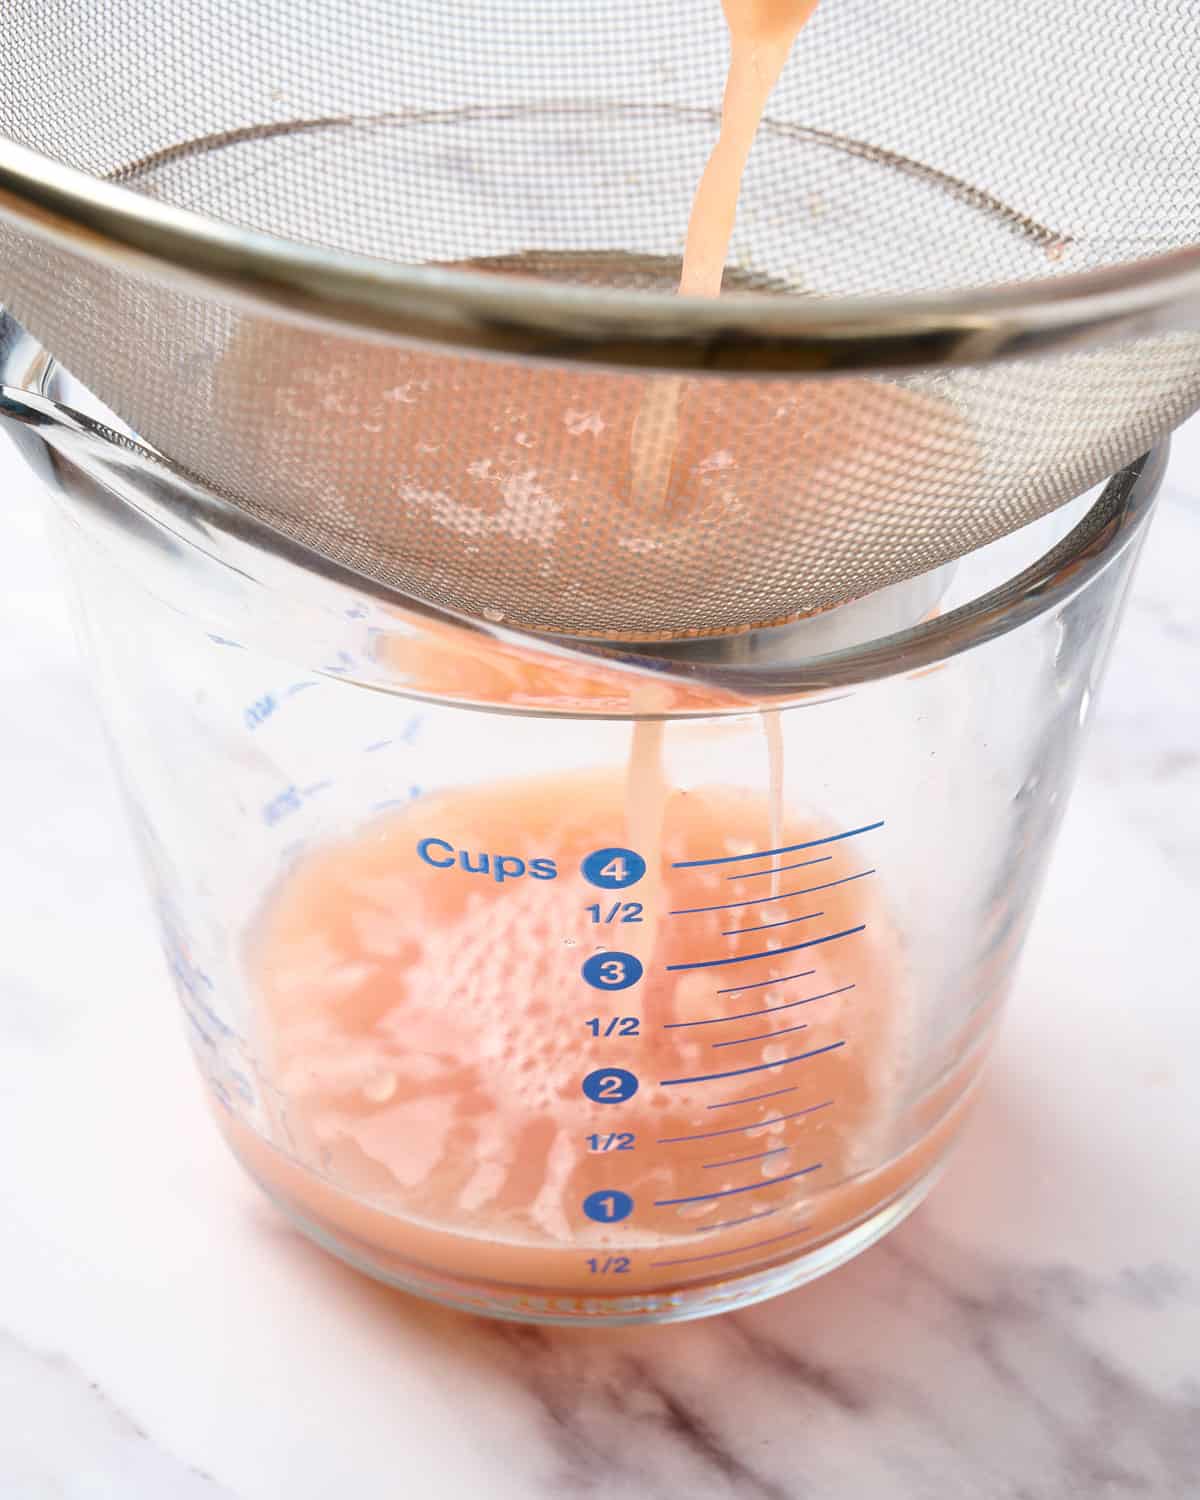 Straining freshly squeezed grapefruit juice with a fine mesh strainer.